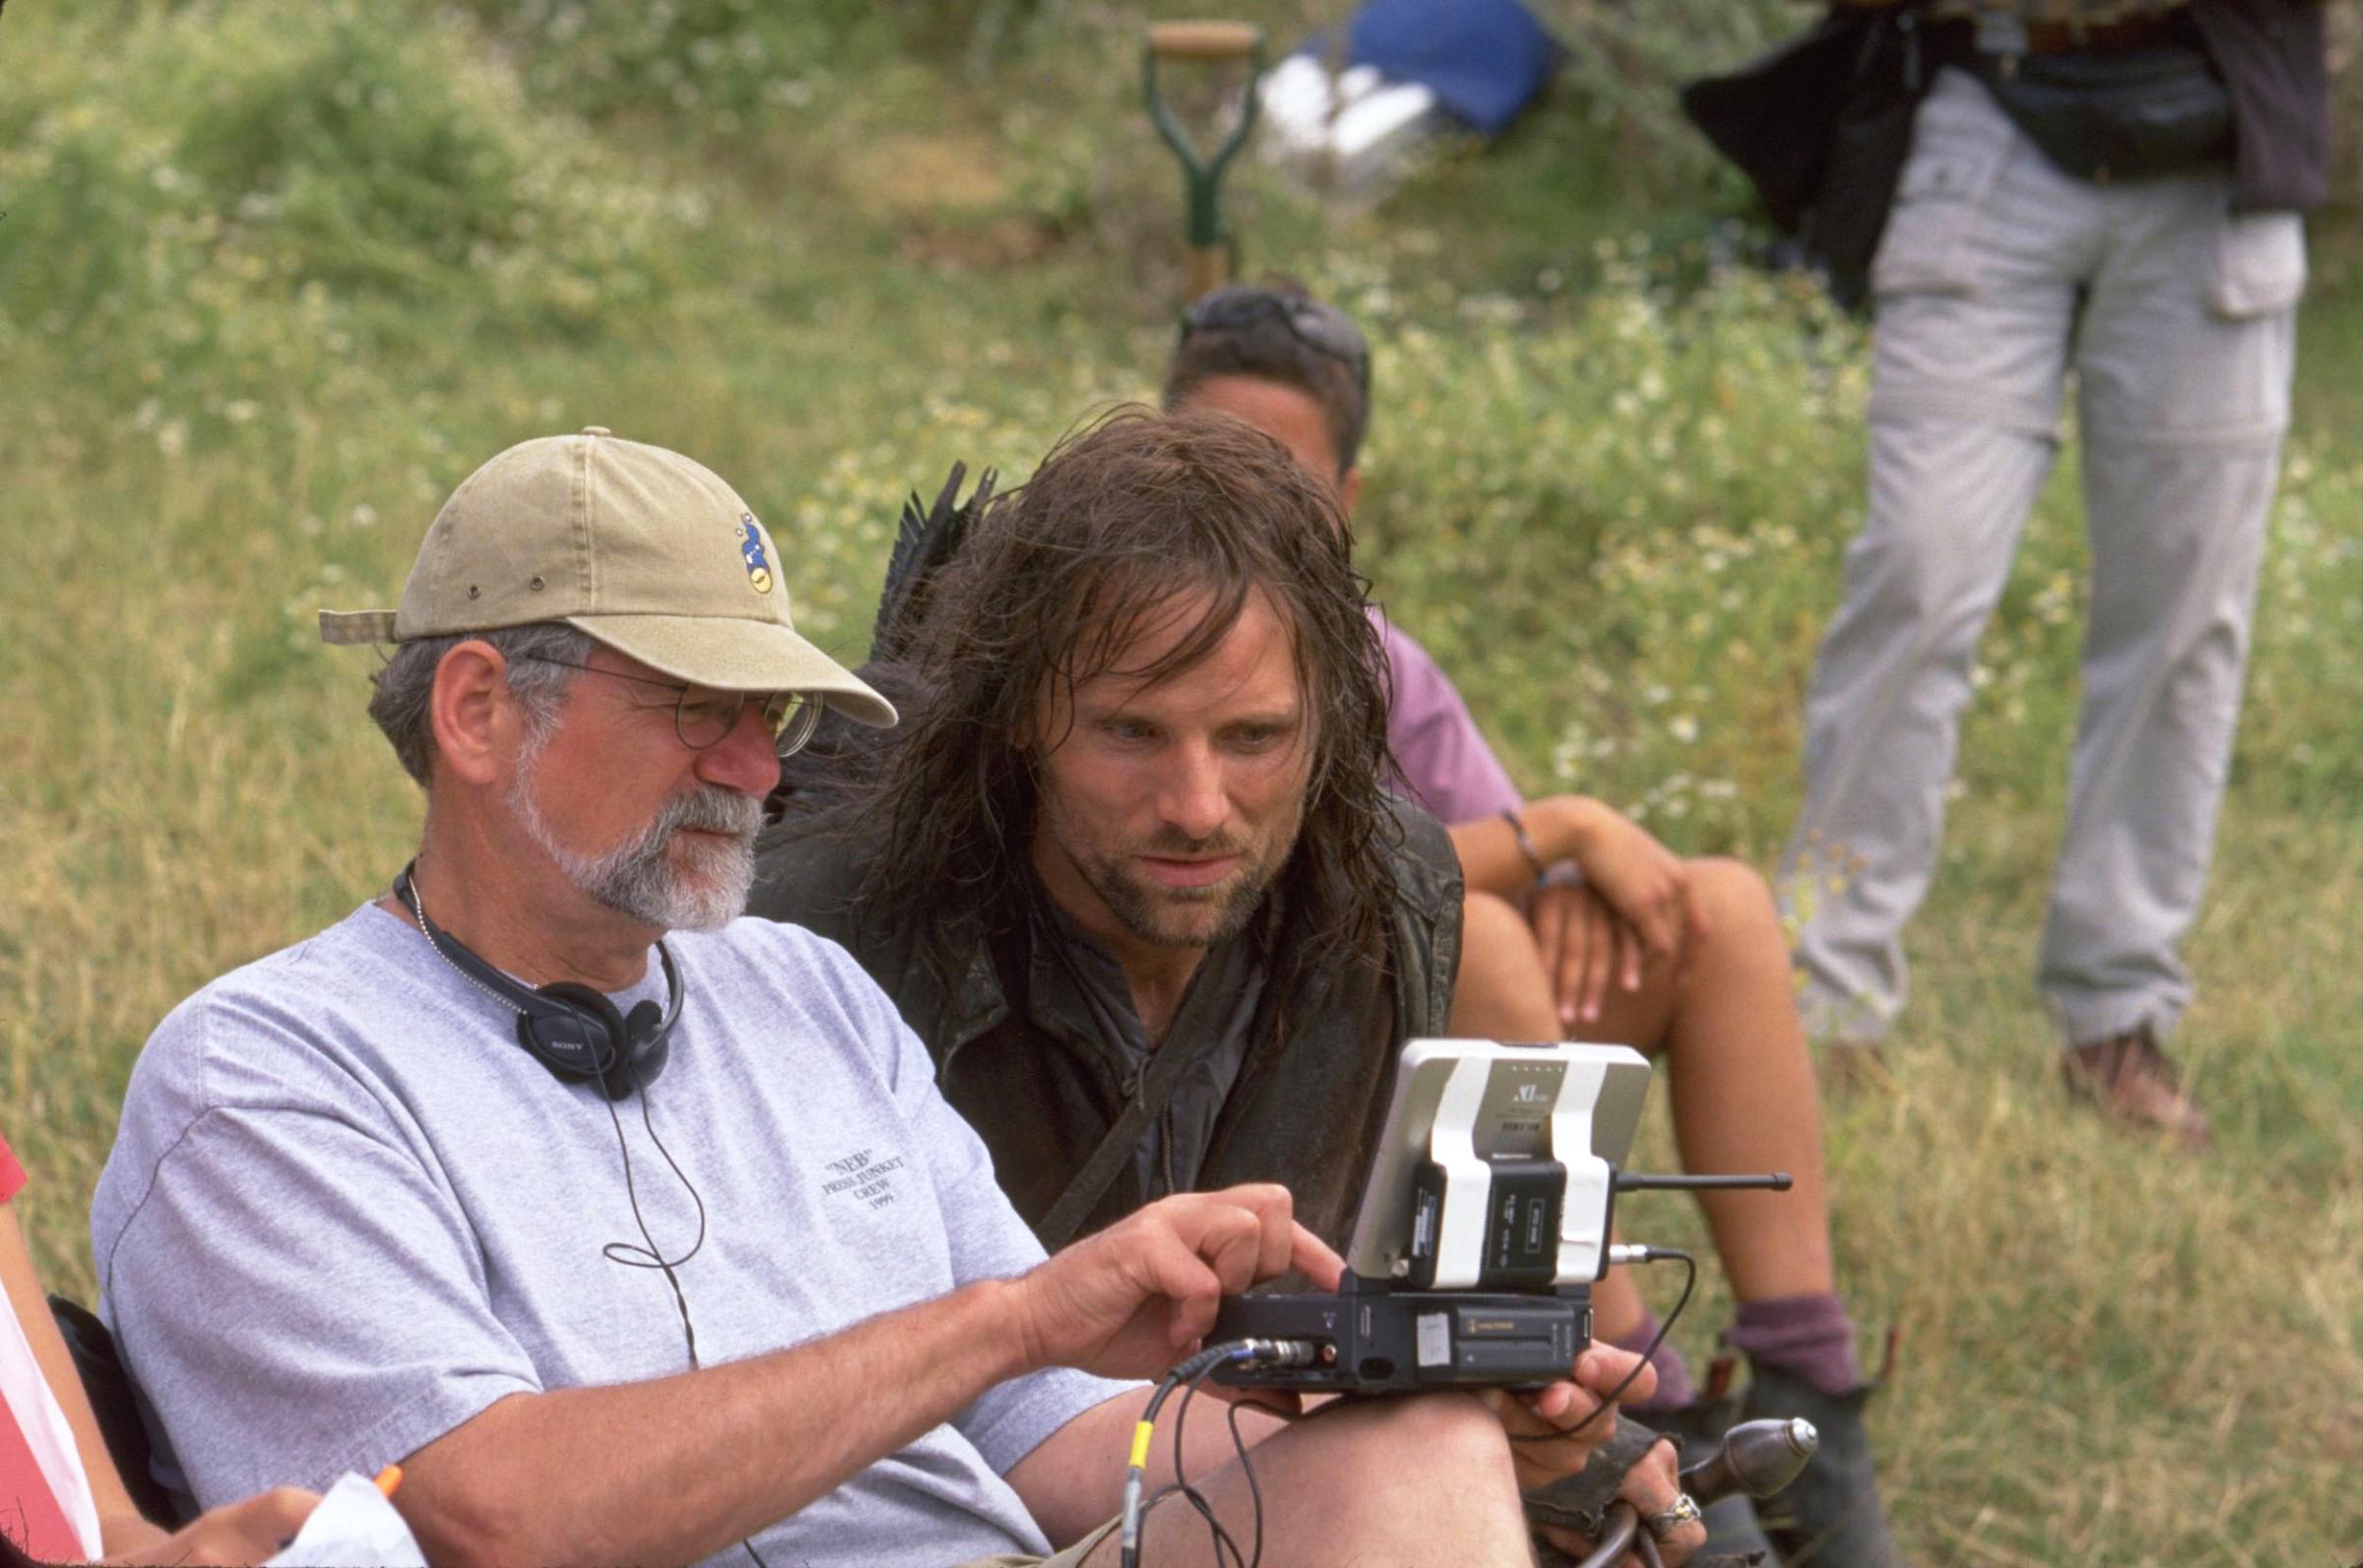 Viggo Mortensen filming The Lord of the Rings: The Two Towers.